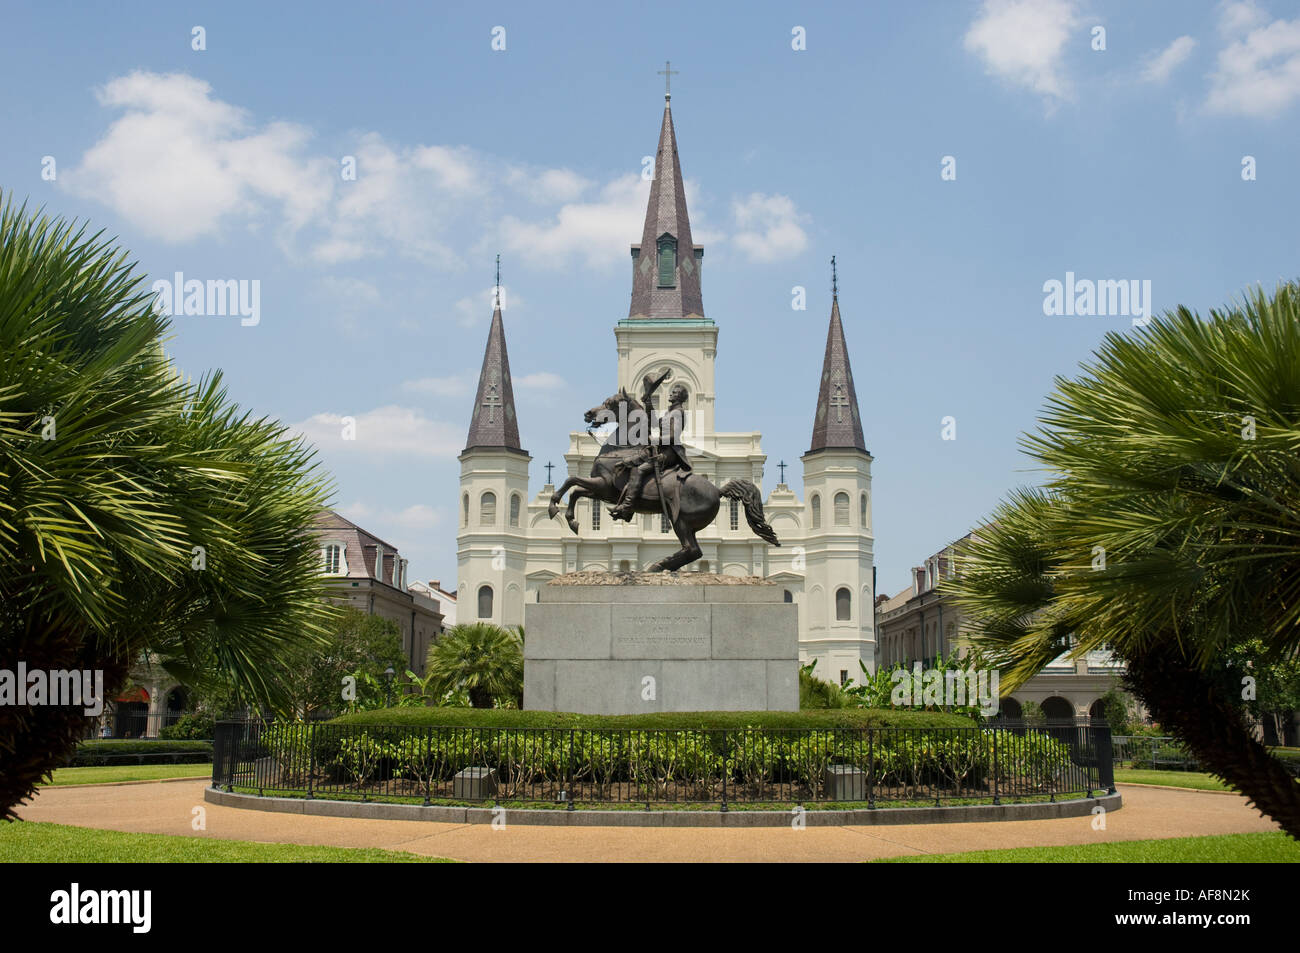 The Statue of Andrew Jackson in Front of Saint Louis Cathedral. New Orleans, Louisiana Stock Photo